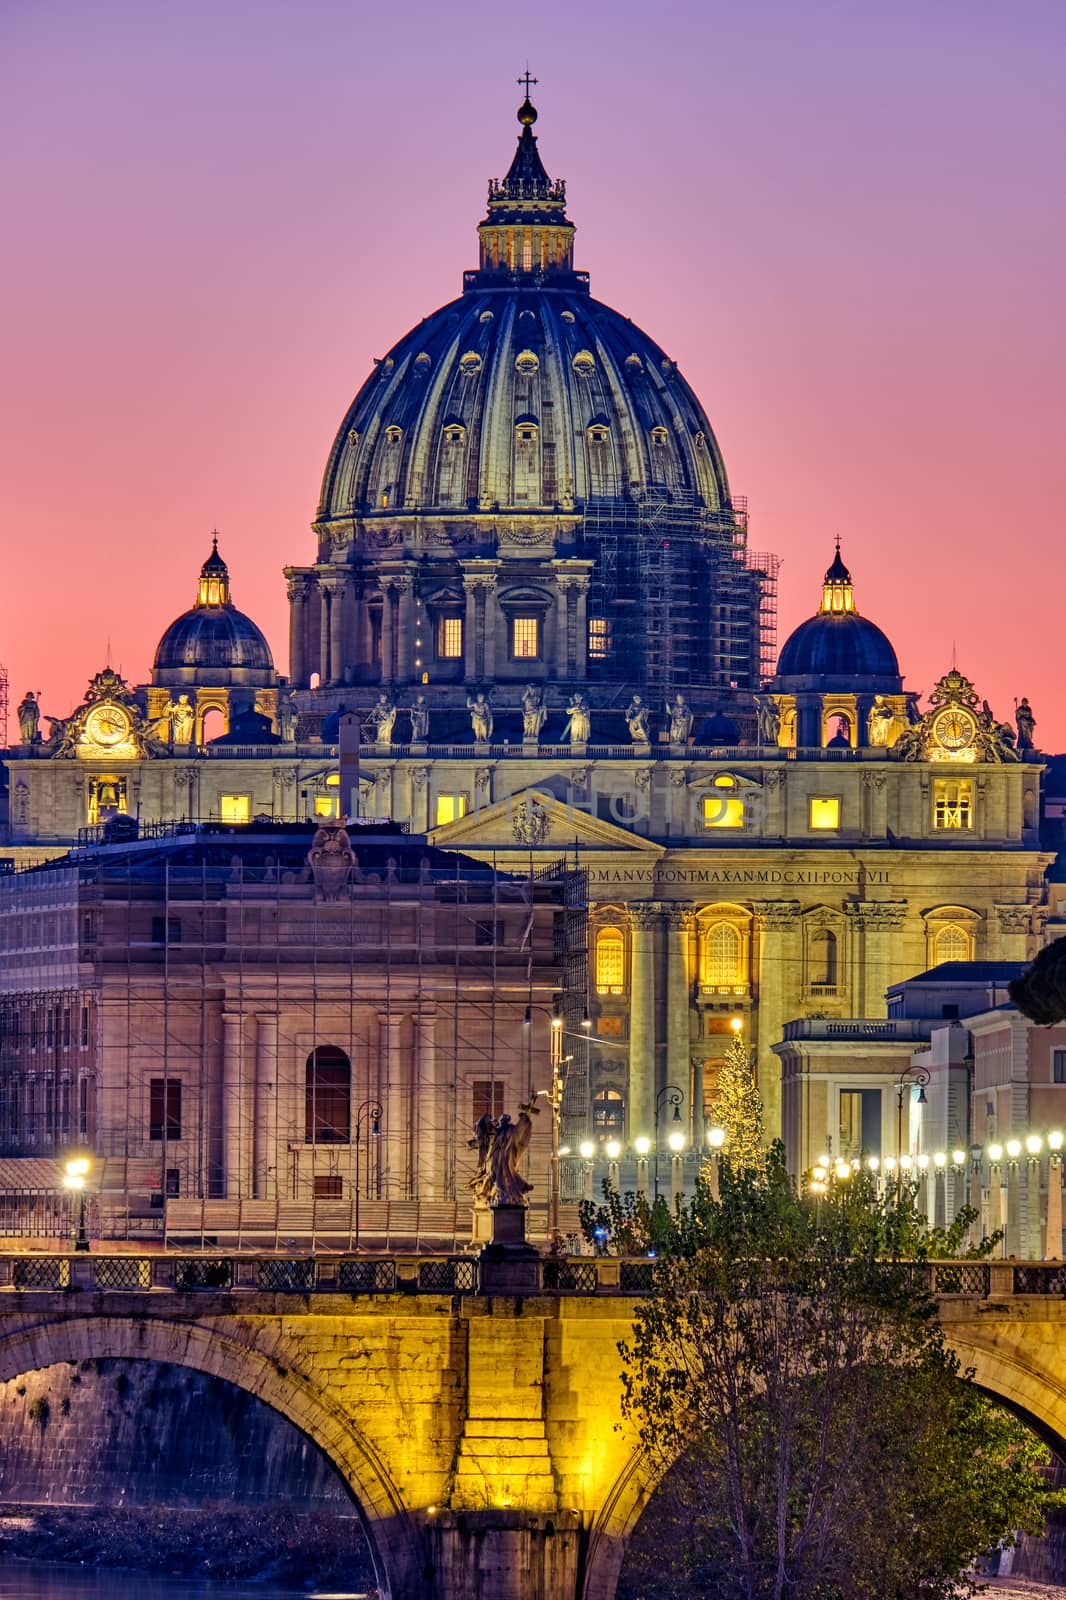 The St. Peters Basilica in the Vatican City, Italy, at sunset